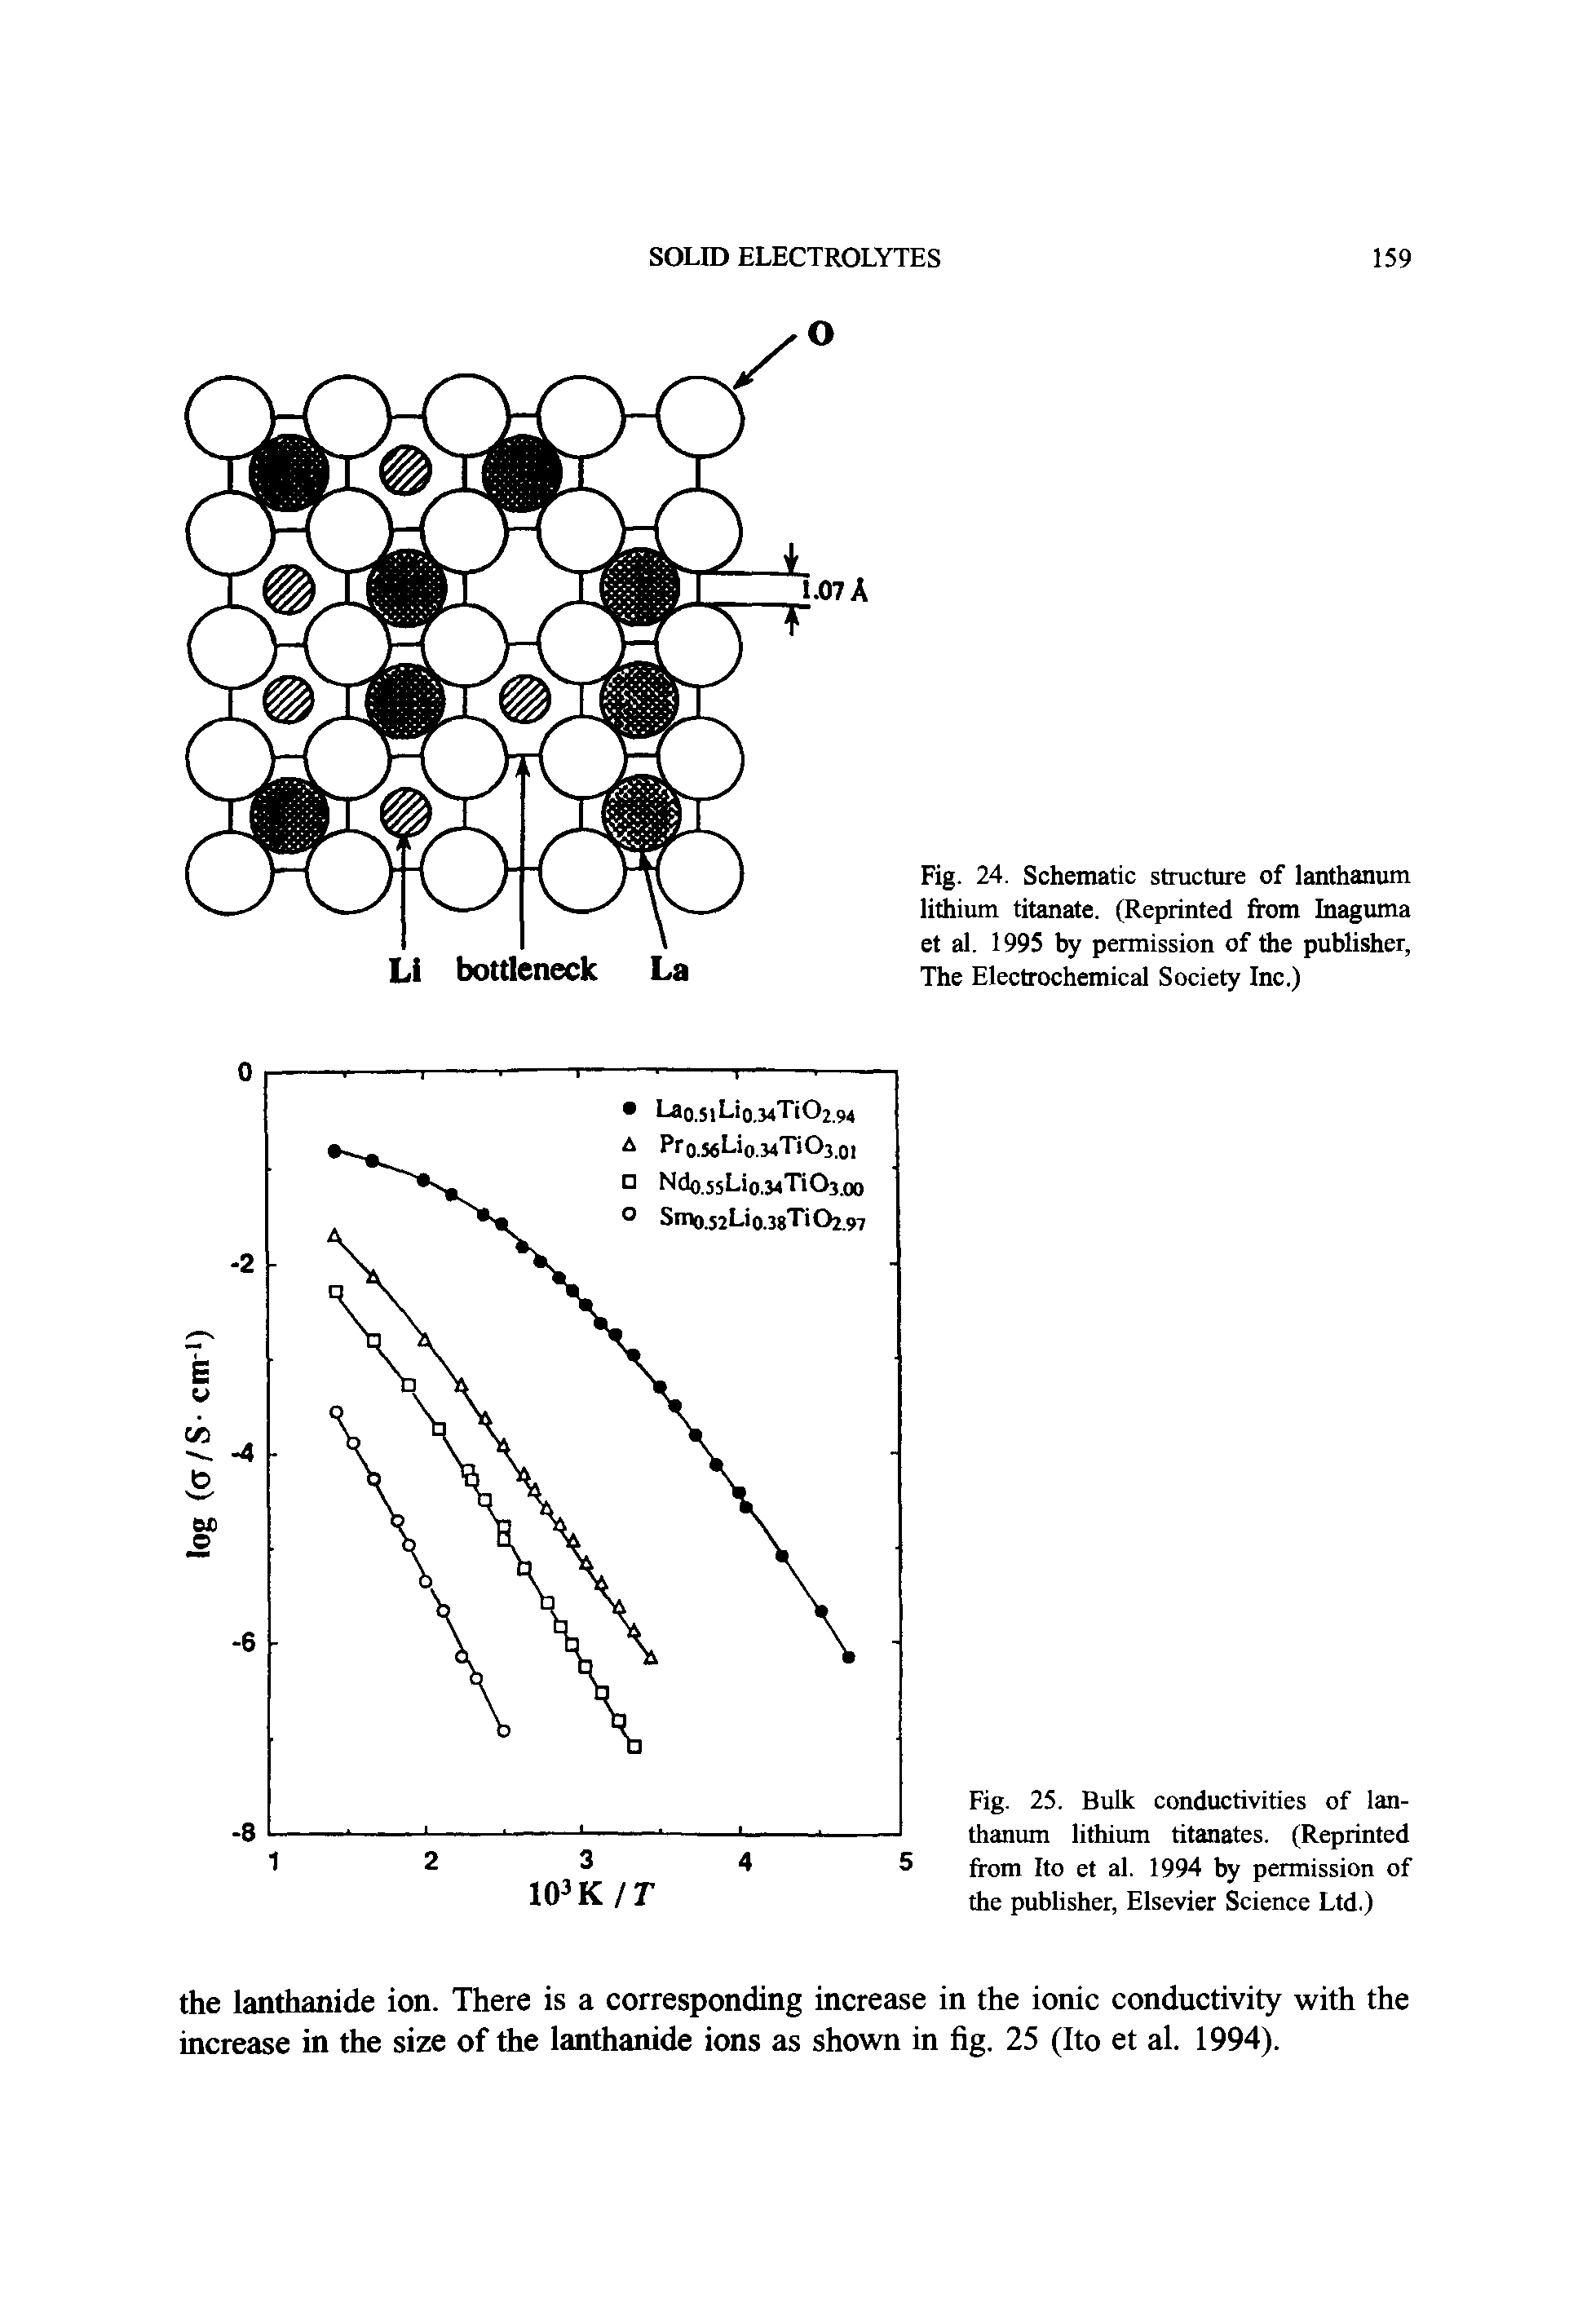 Fig. 25. Bulk conductivities of lanthanum lithium titanates. (Reprinted from Ito et al. 1994 by permission of the publisher, Elsevier Science Ltd.)...